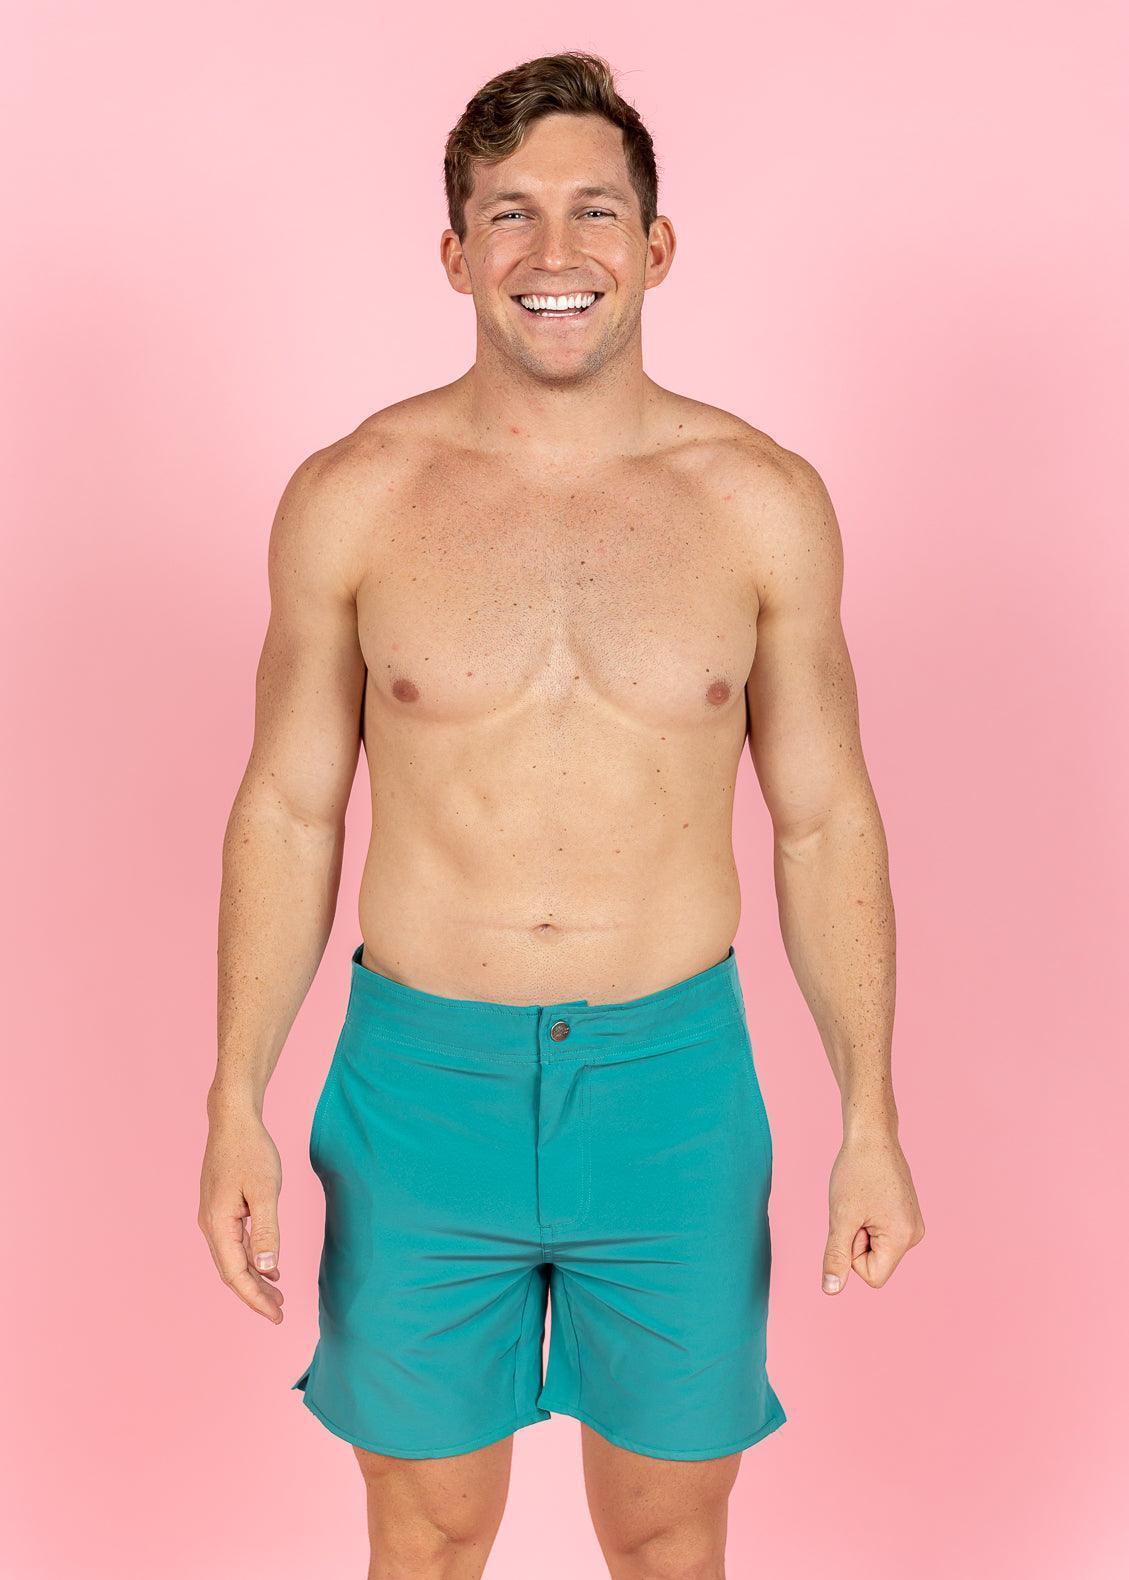 Mens Swimsuit - Shorts - Teal Waves